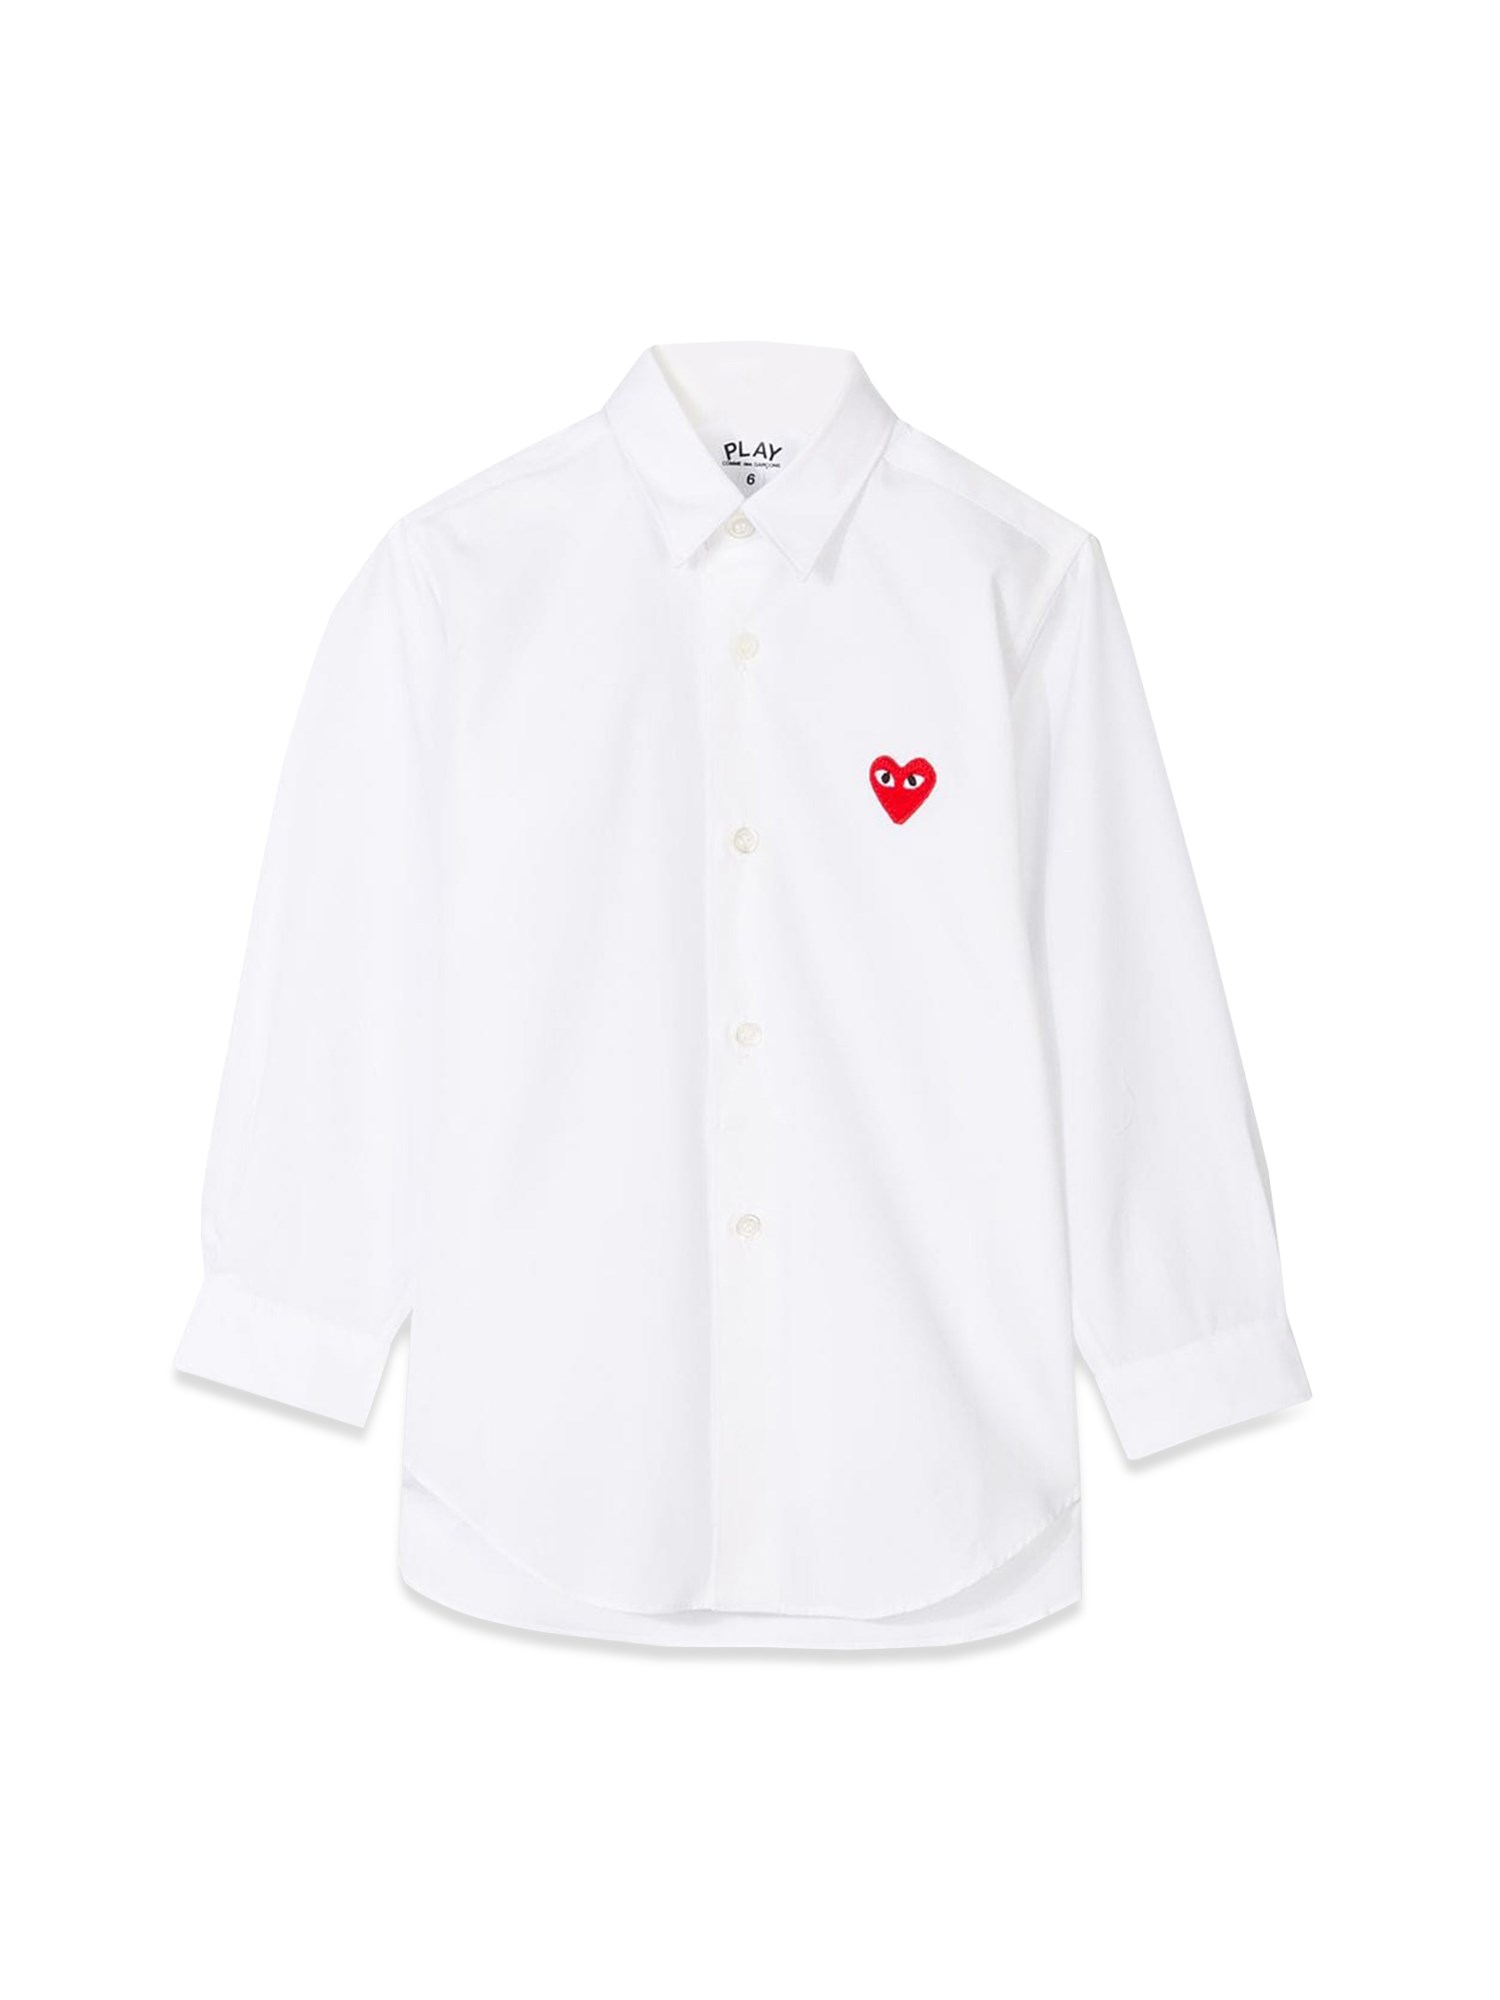 comme des garcons play red heart m/l shirt